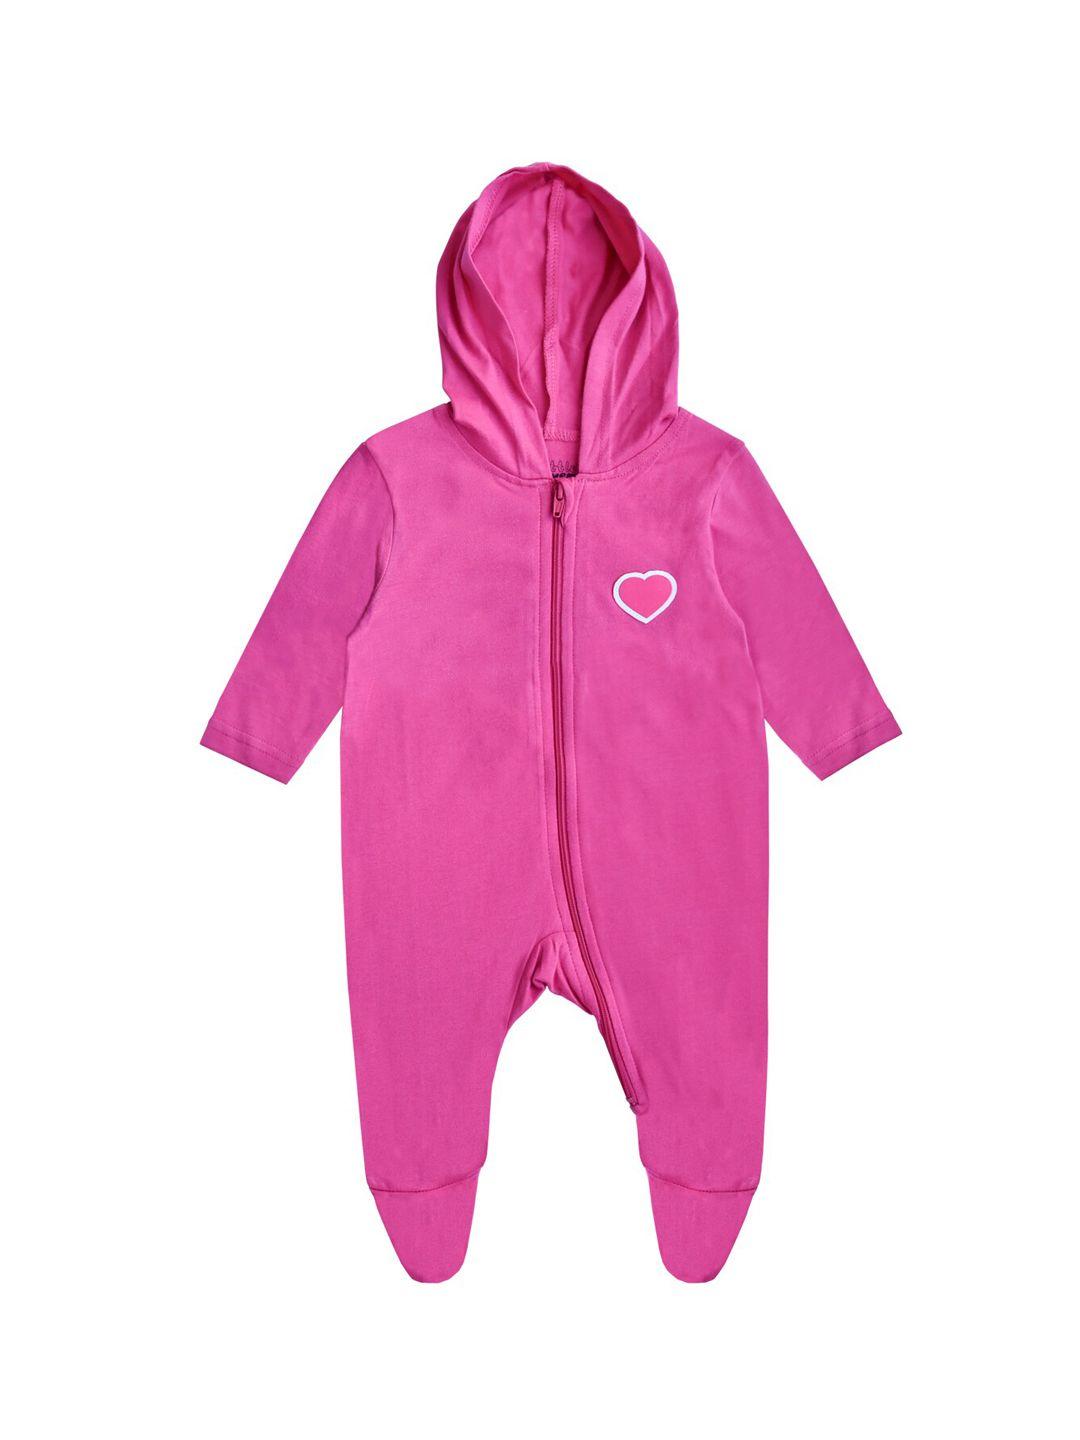 little-heaven-kids-girls-pink-solid-hooded-cotton-rompers